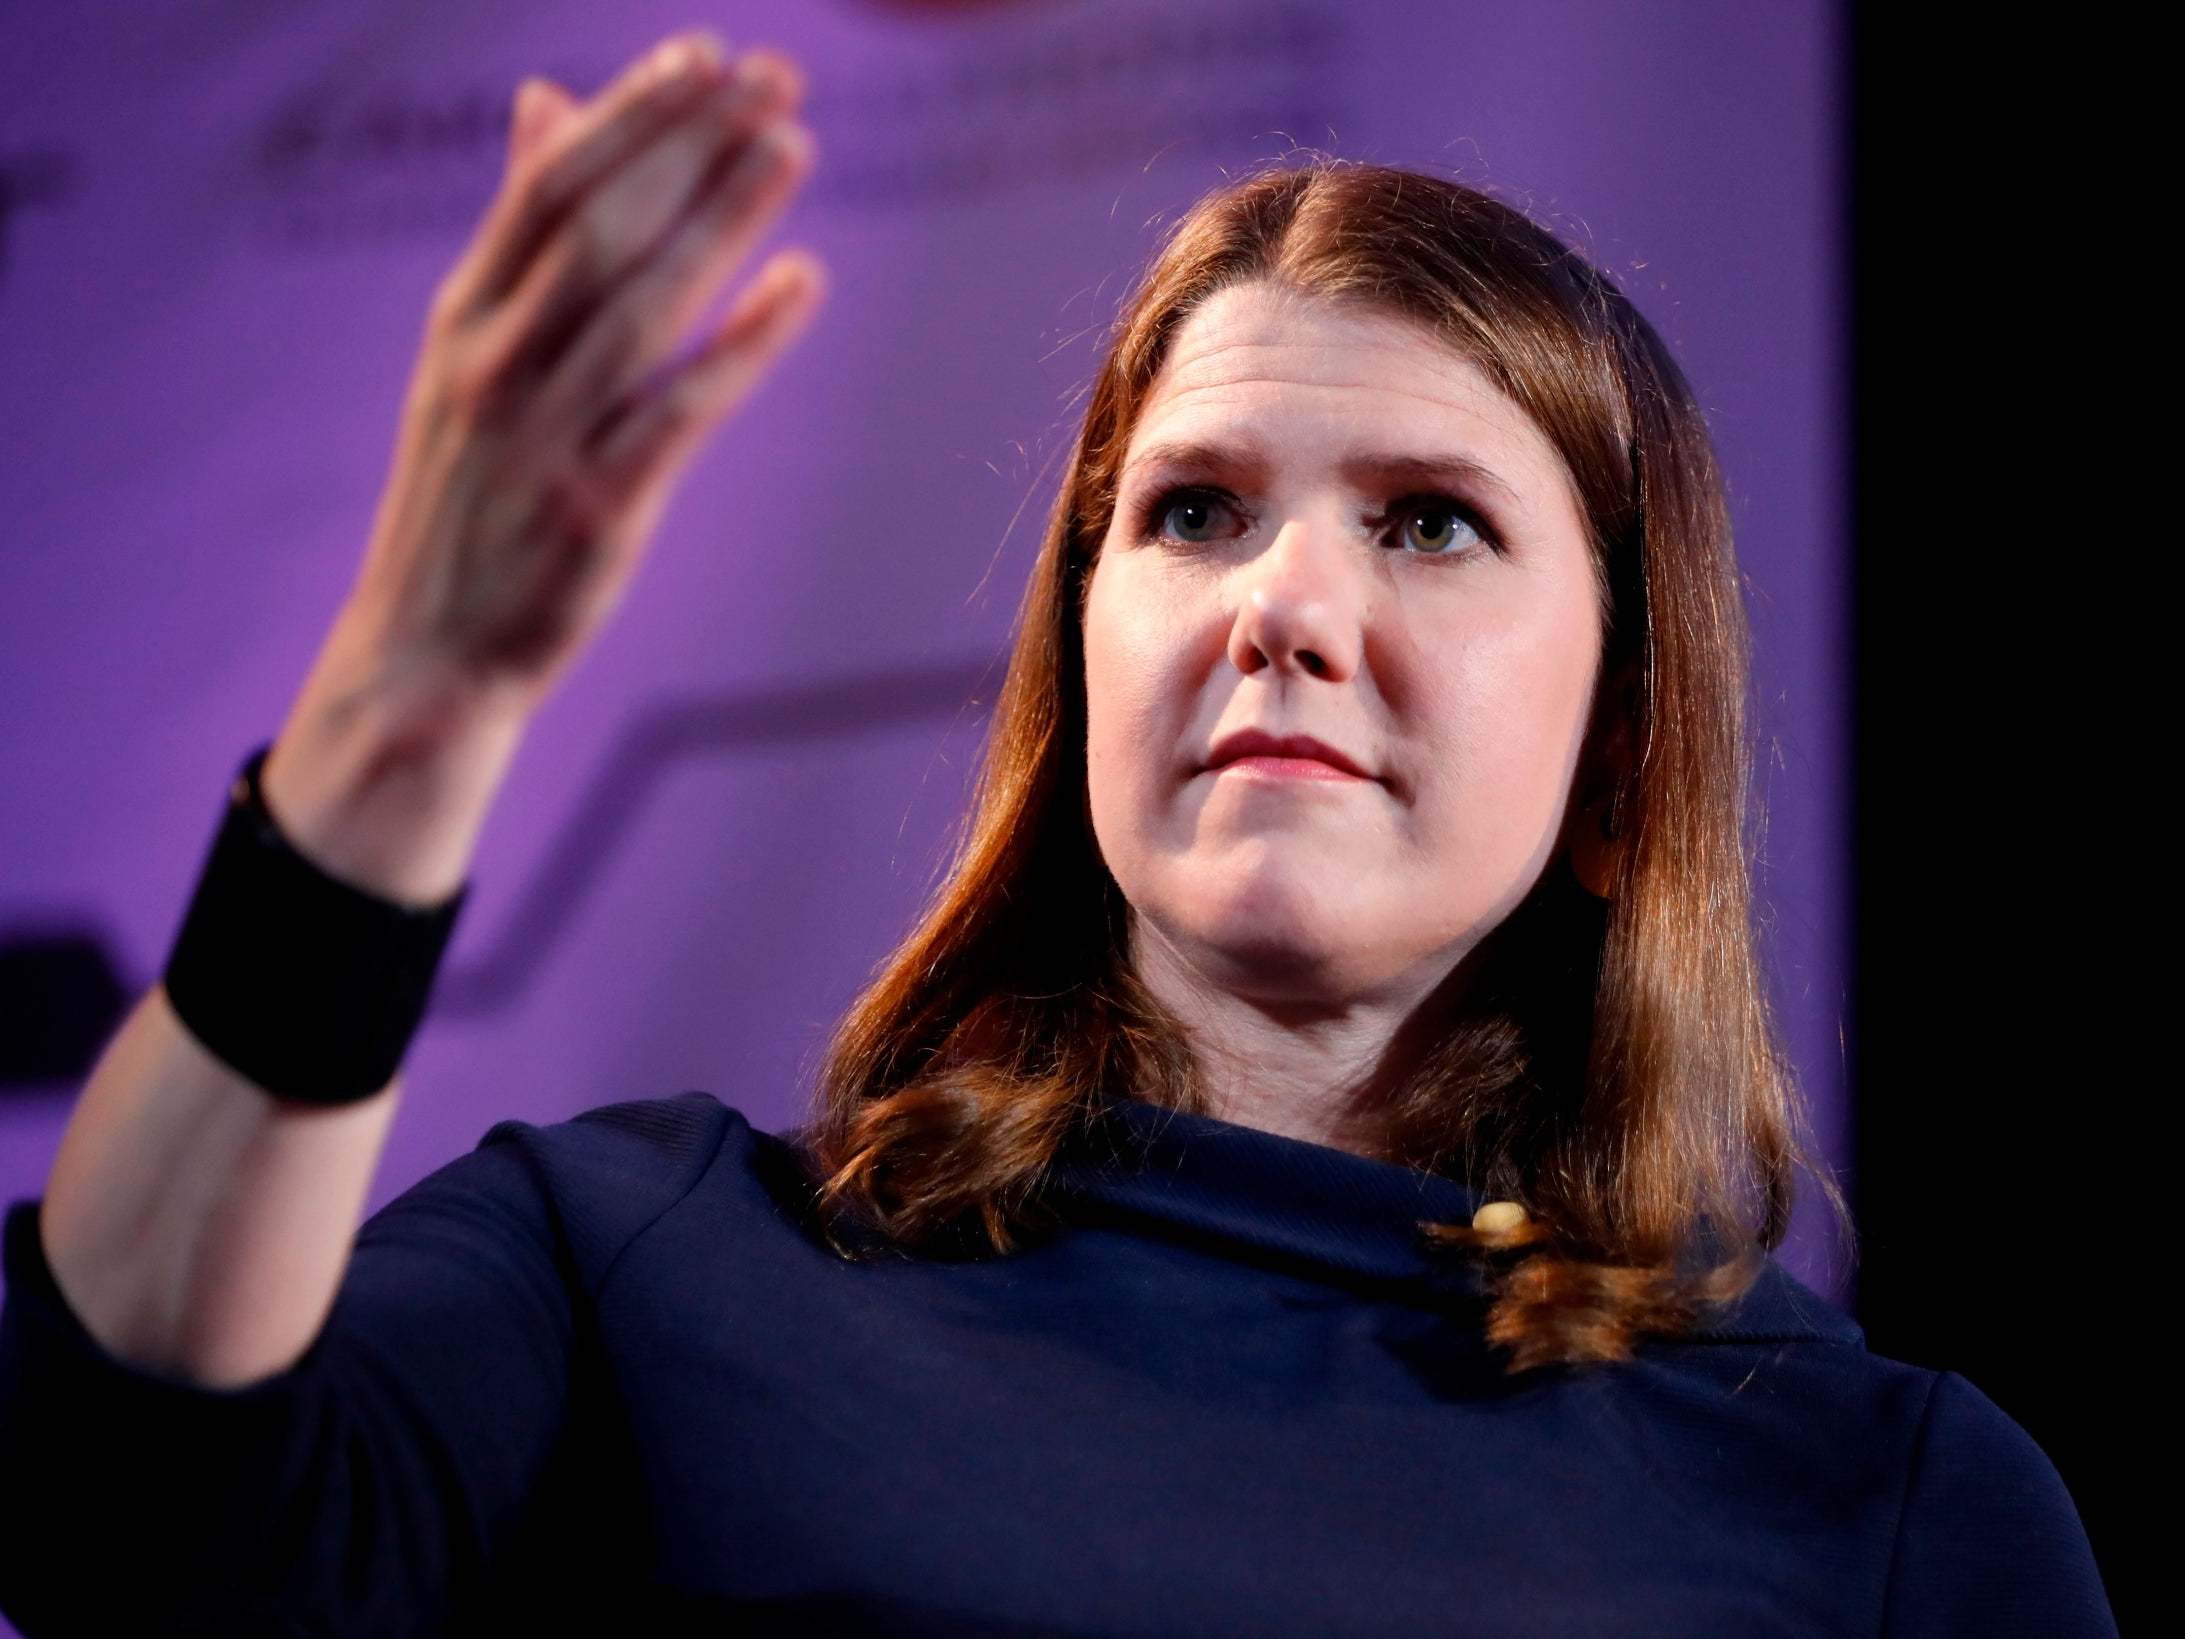 ‘Jeremy Corbyn is not going into No 10 on the basis of Liberal Democrats’ votes,’ said Lib Dem leader Jo Swinson